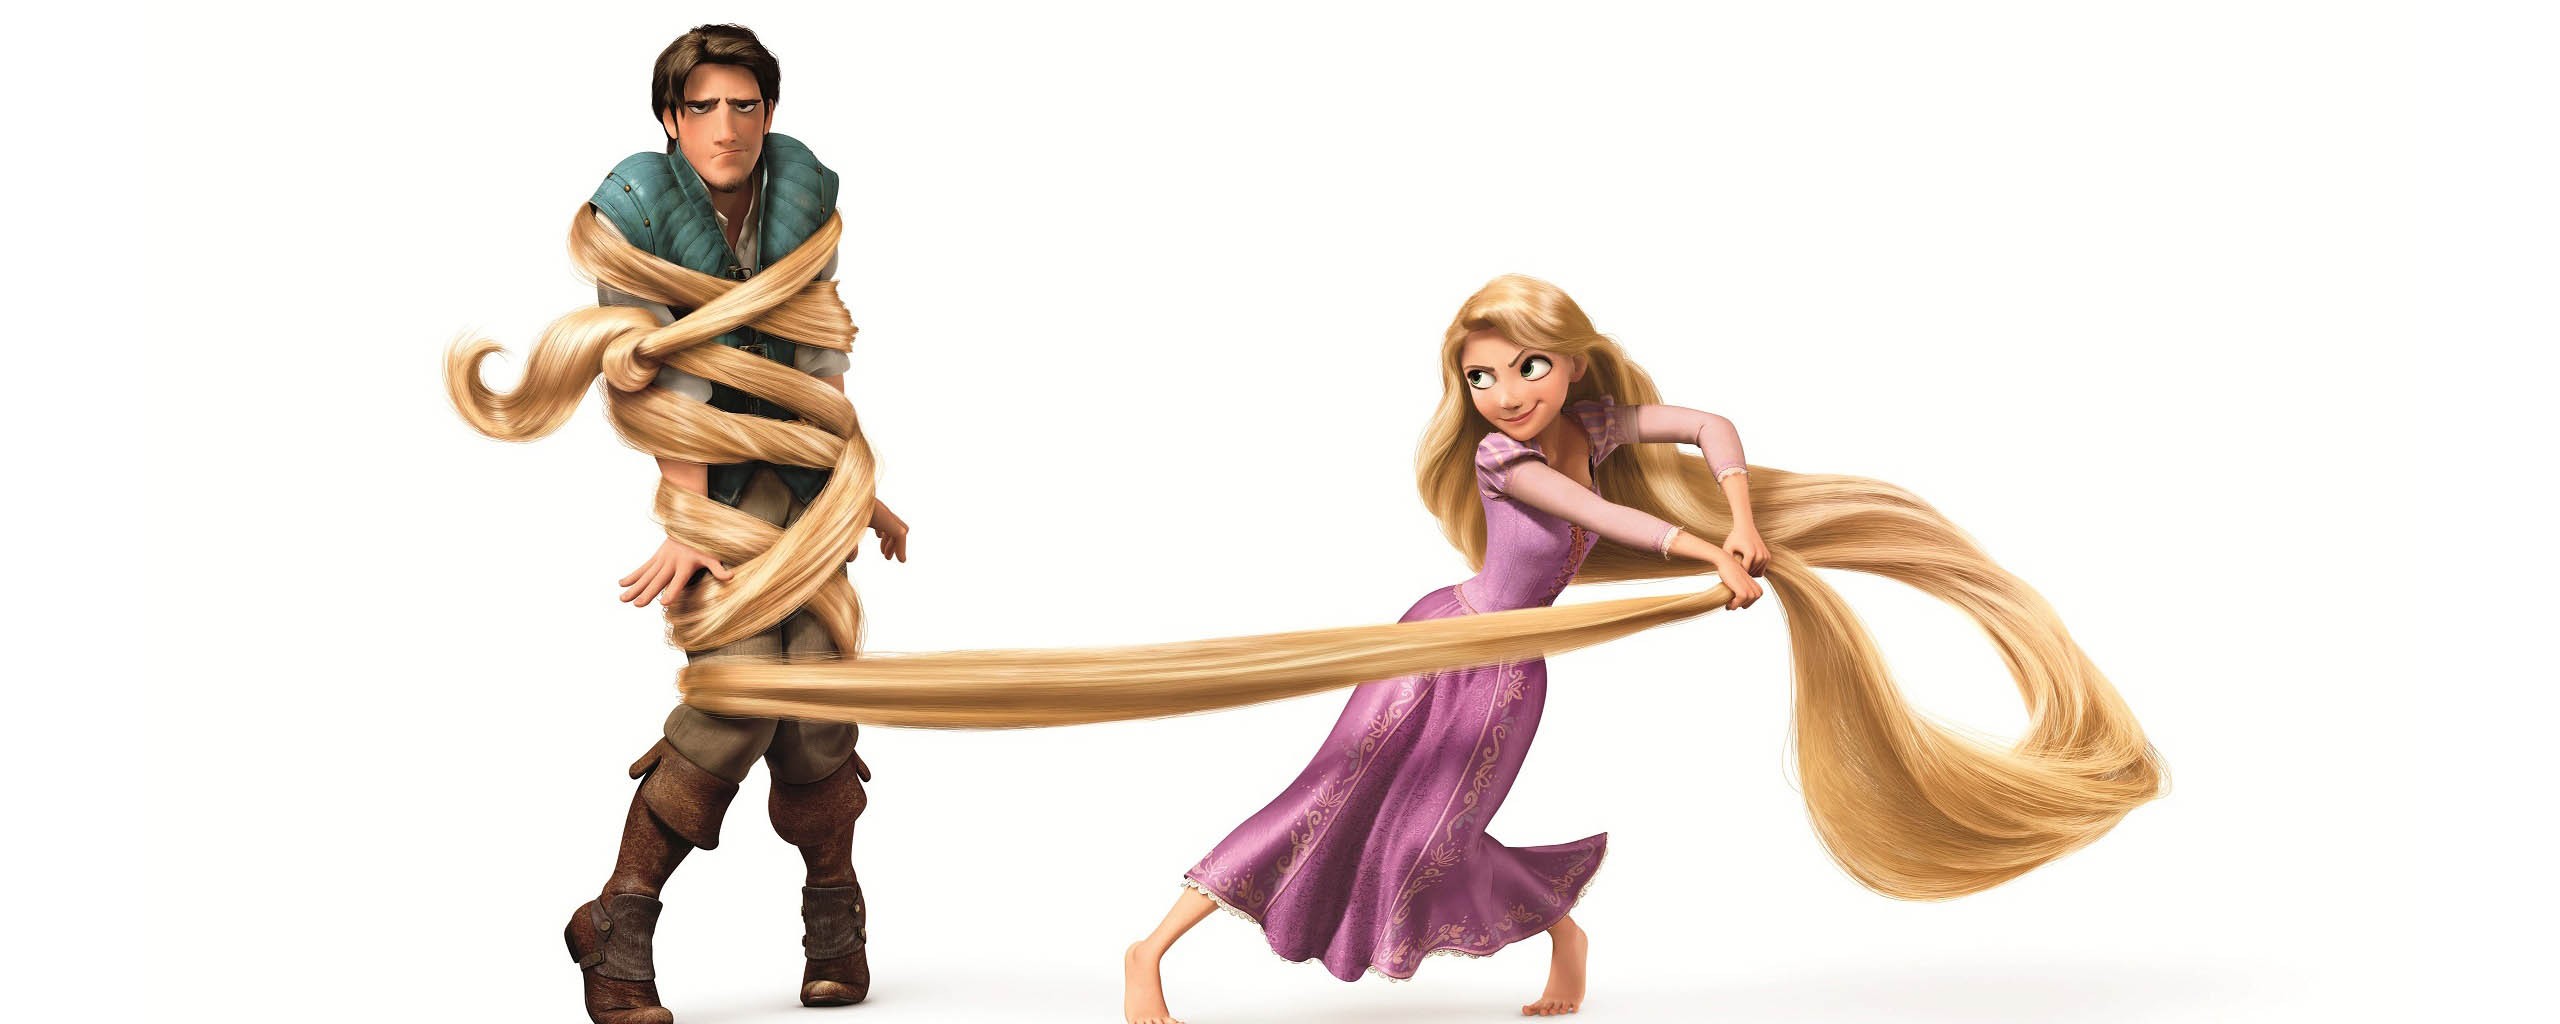 Tangled Rapunzel And Flynn | Clipart Panda - Free Clipart Images